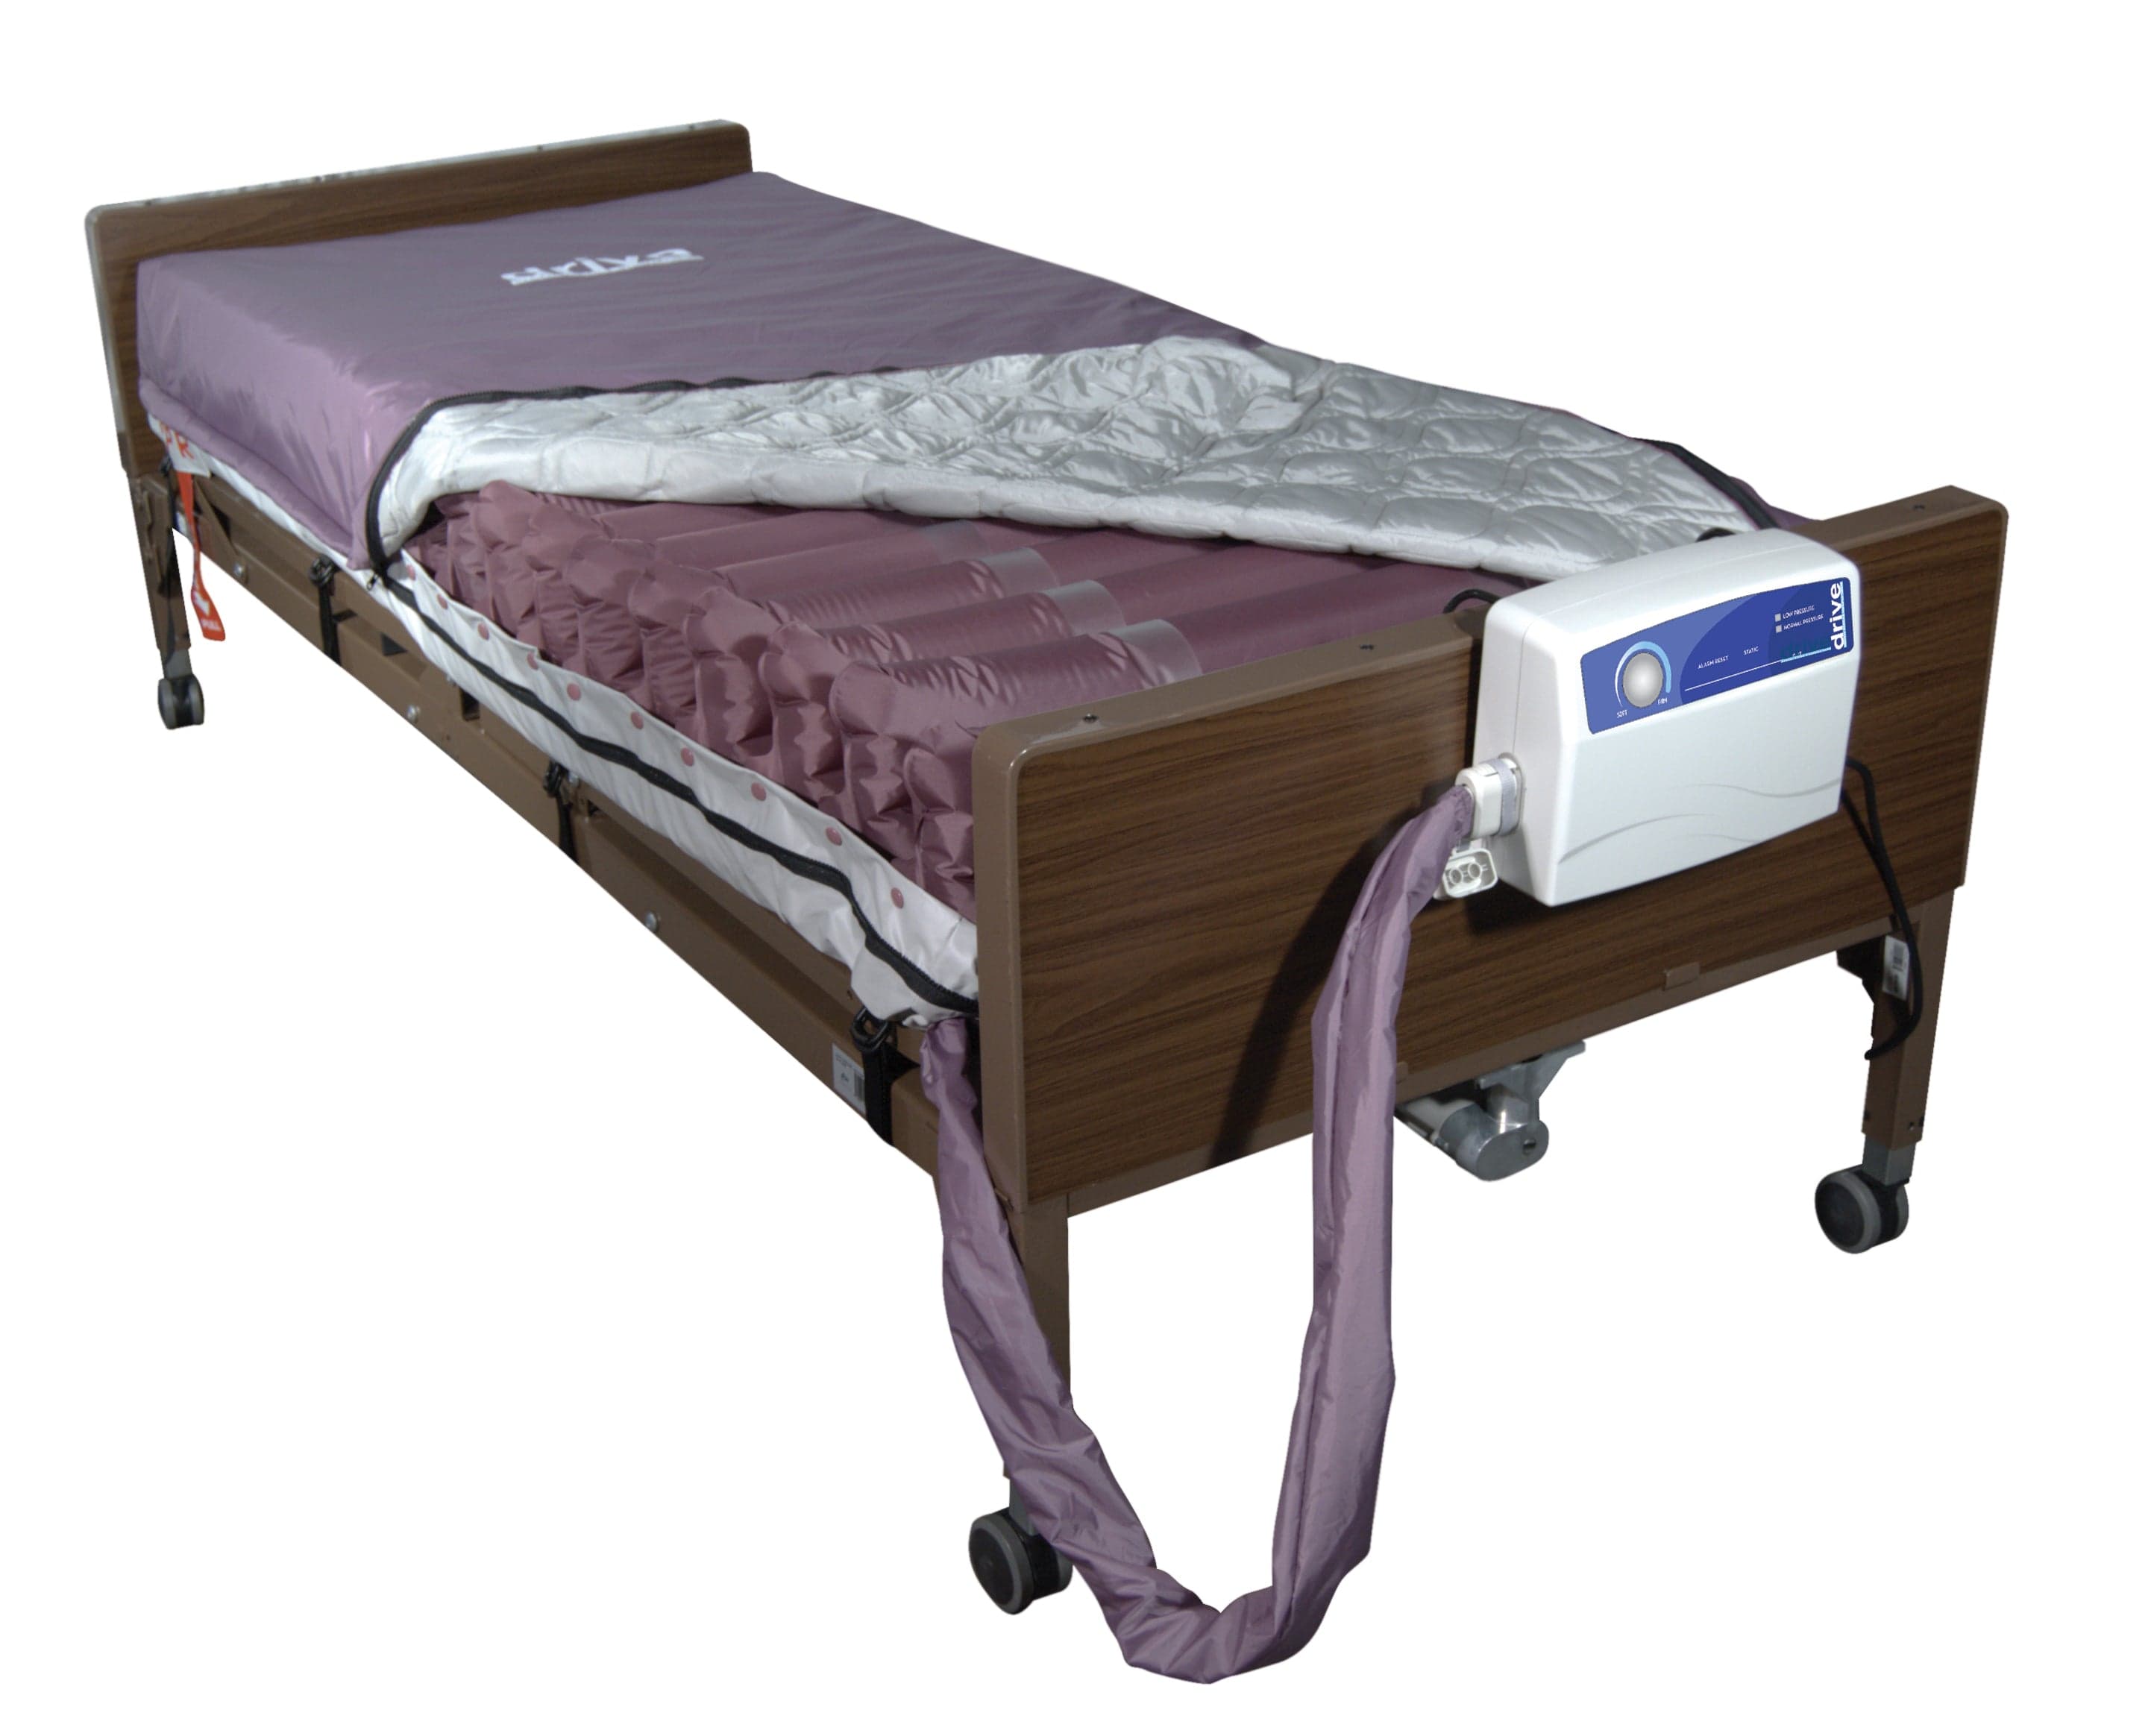 Drive Medical Drive Medical Med Aire Low Air Loss Mattress Replacement System with Alternating Pressure 14027